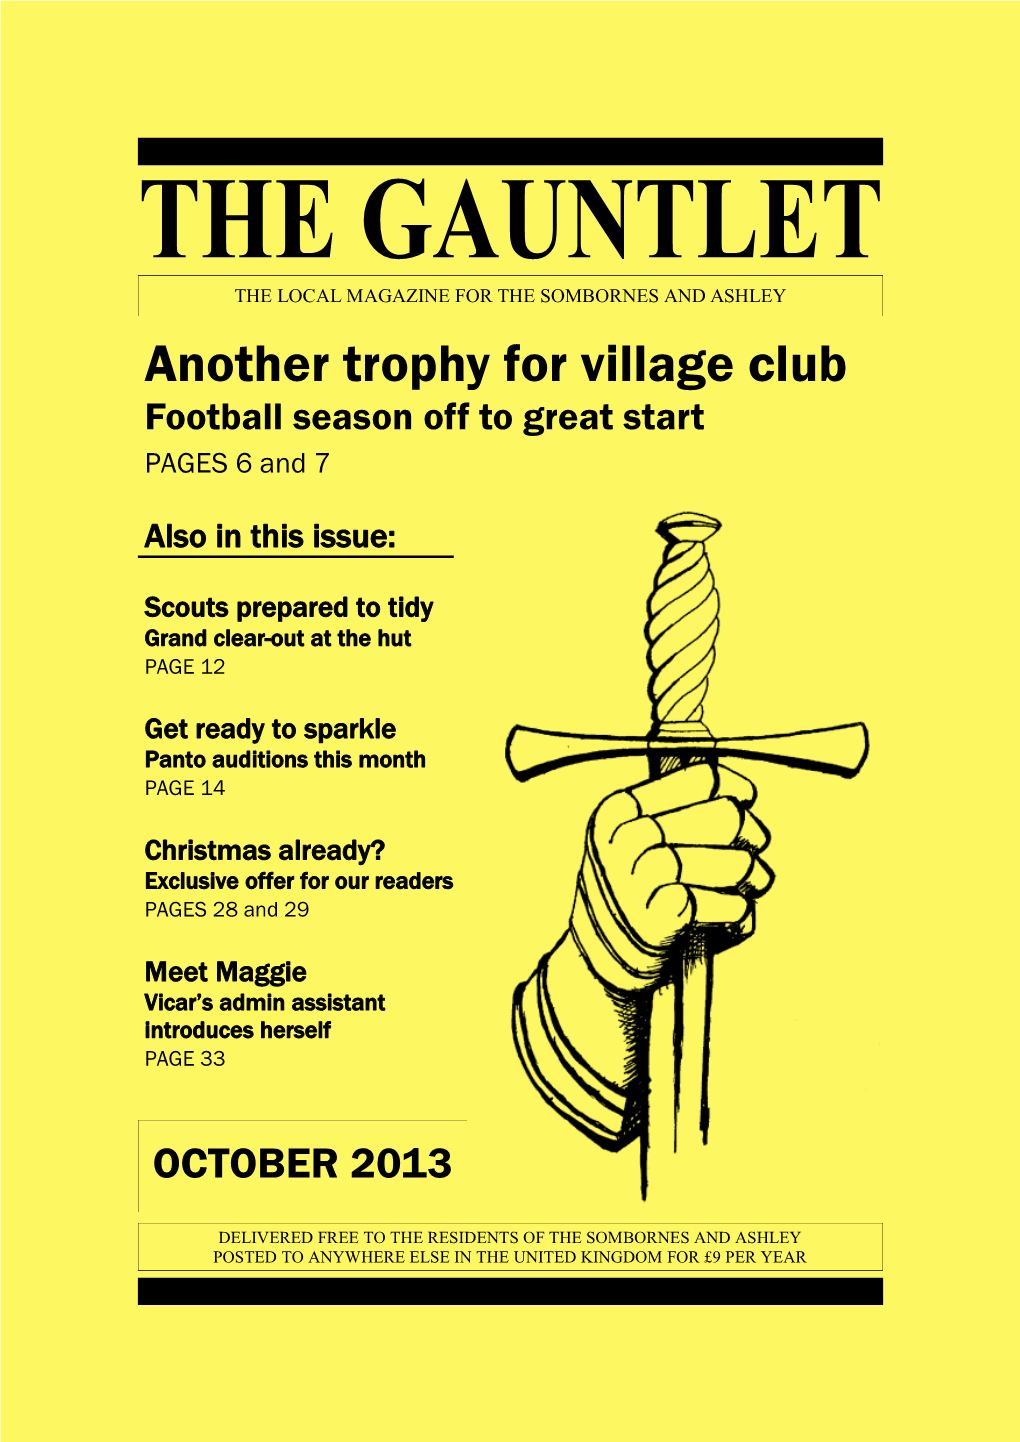 THE GAUNTLET the LOCAL MAGAZINE for the SOMBORNES and ASHLEY Another Trophy for Village Club Football Season Off to Great Start PAGES 6 and 7